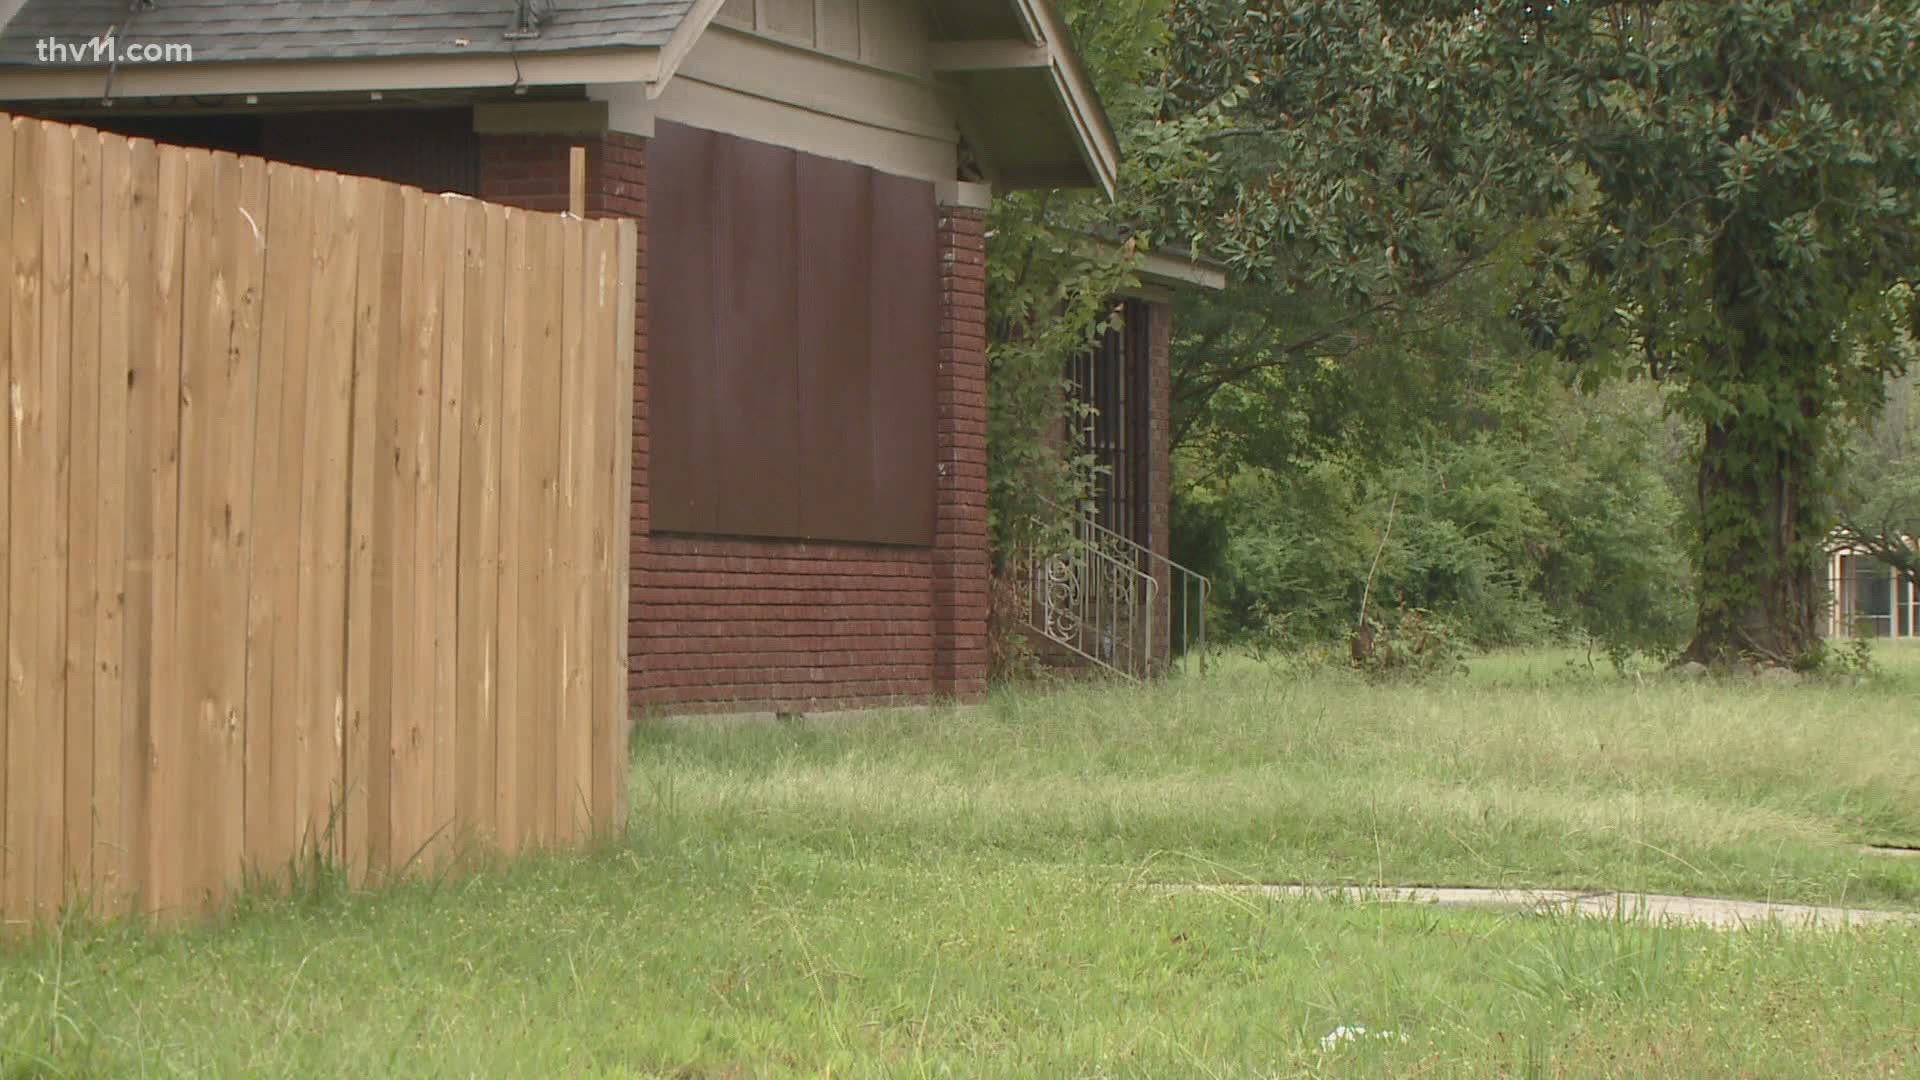 A community is in shock and looking for answers after three were killed yesterday.